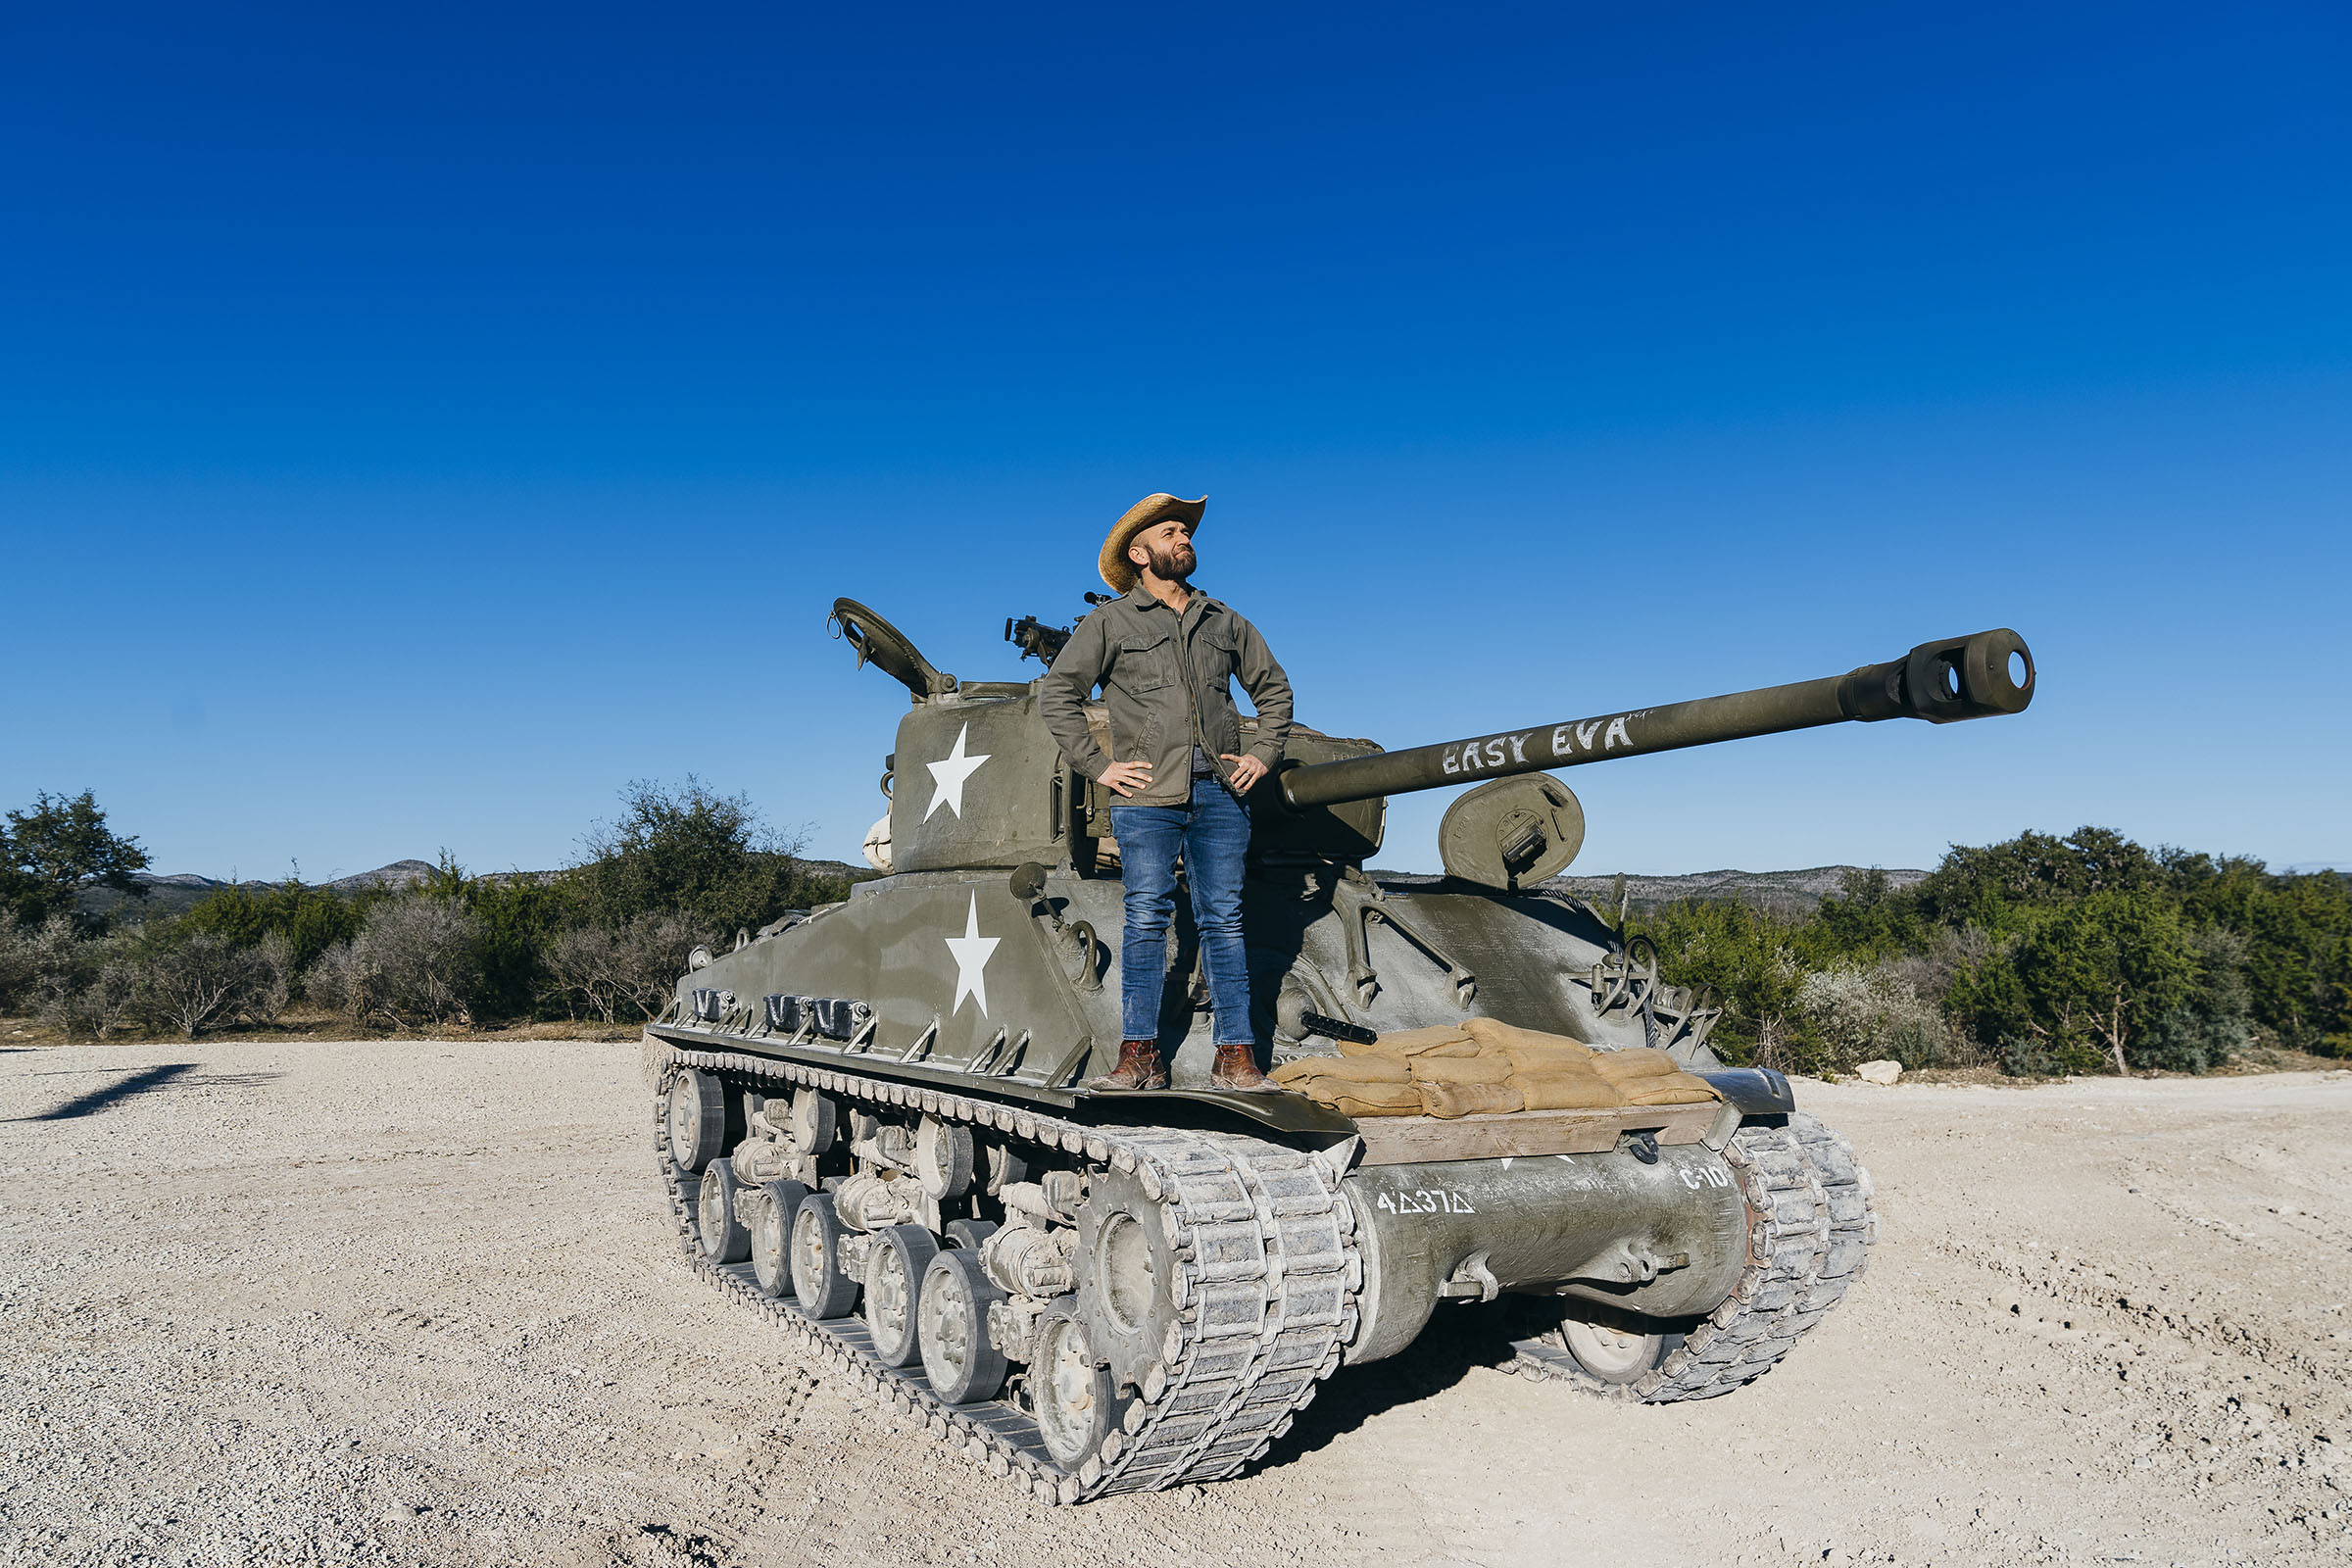 A man in a cowboy hat stands on top of a large green tank on dusty ground